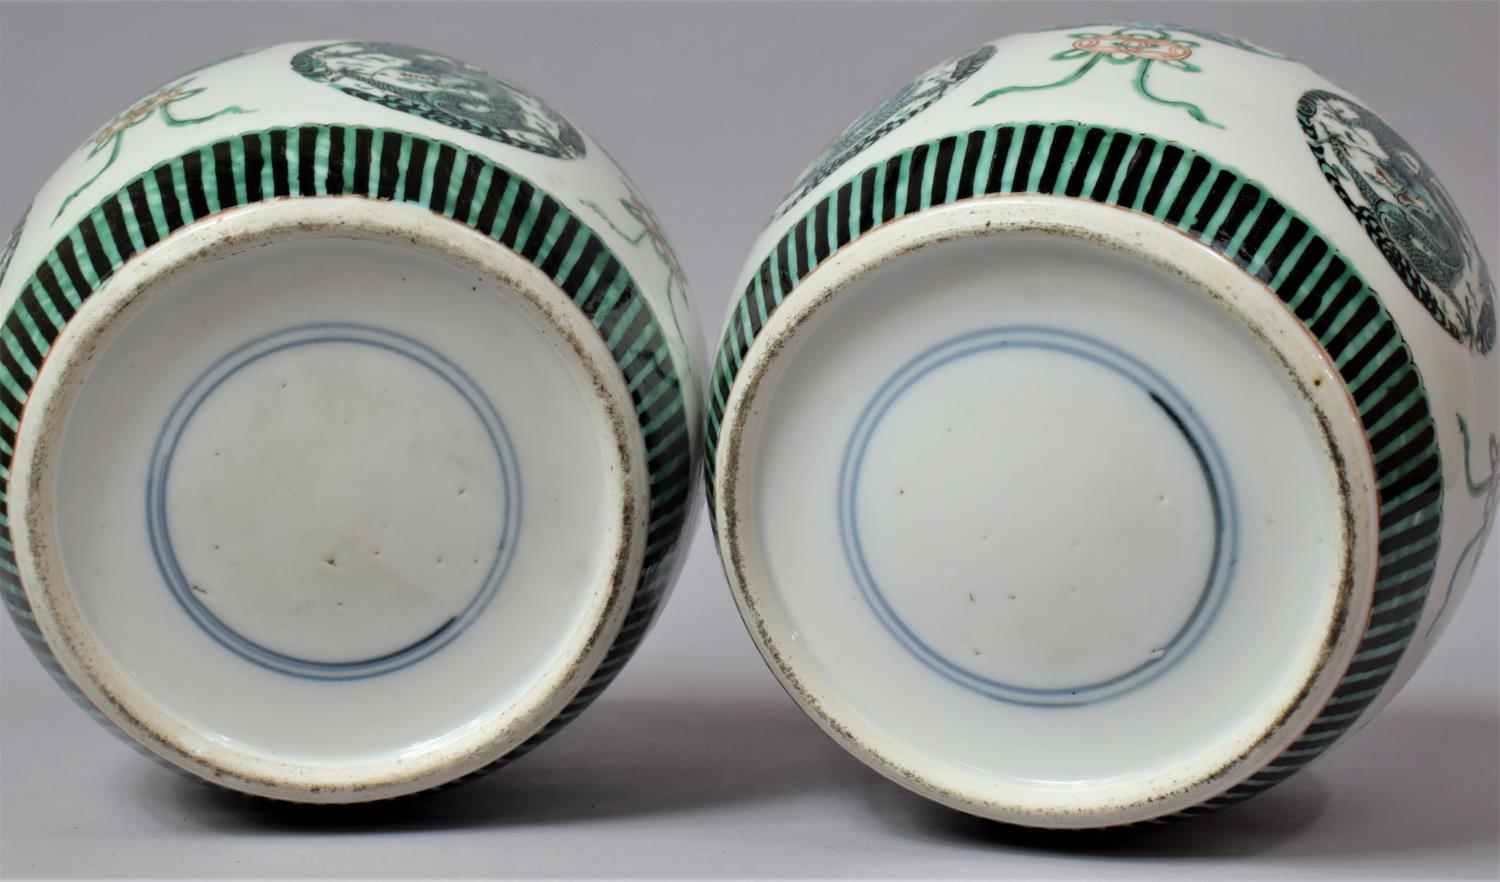 A Pair of 18th Century Chinese Famille Verte Ginger Jars Decorated with Applied Enamels Depicting - Image 5 of 10